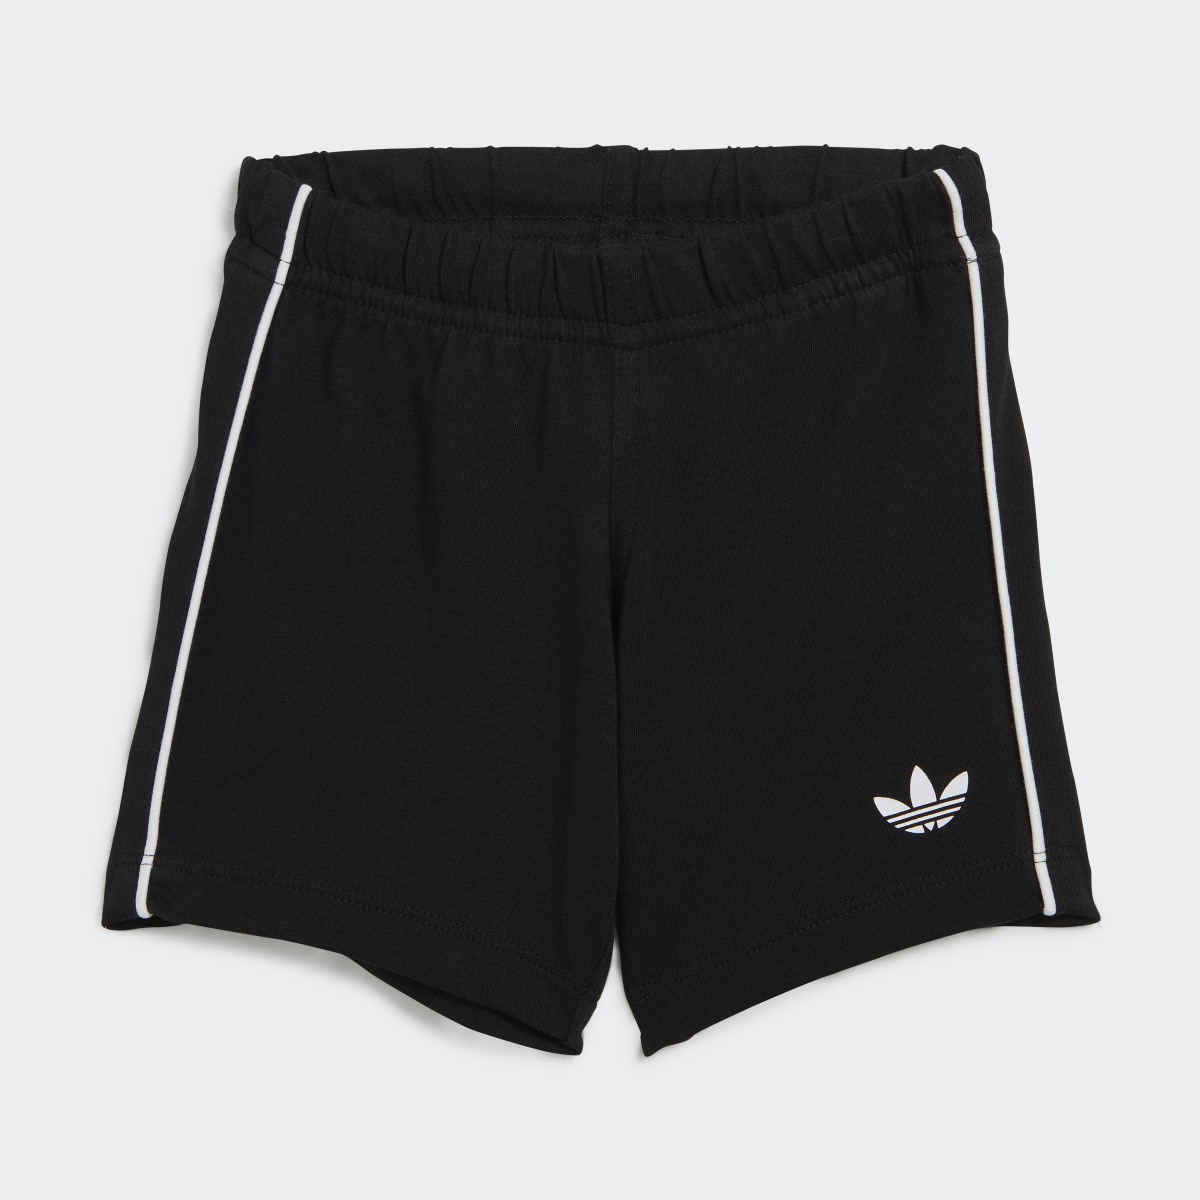 Adidas Completo adicolor Shorts and Tee. 5